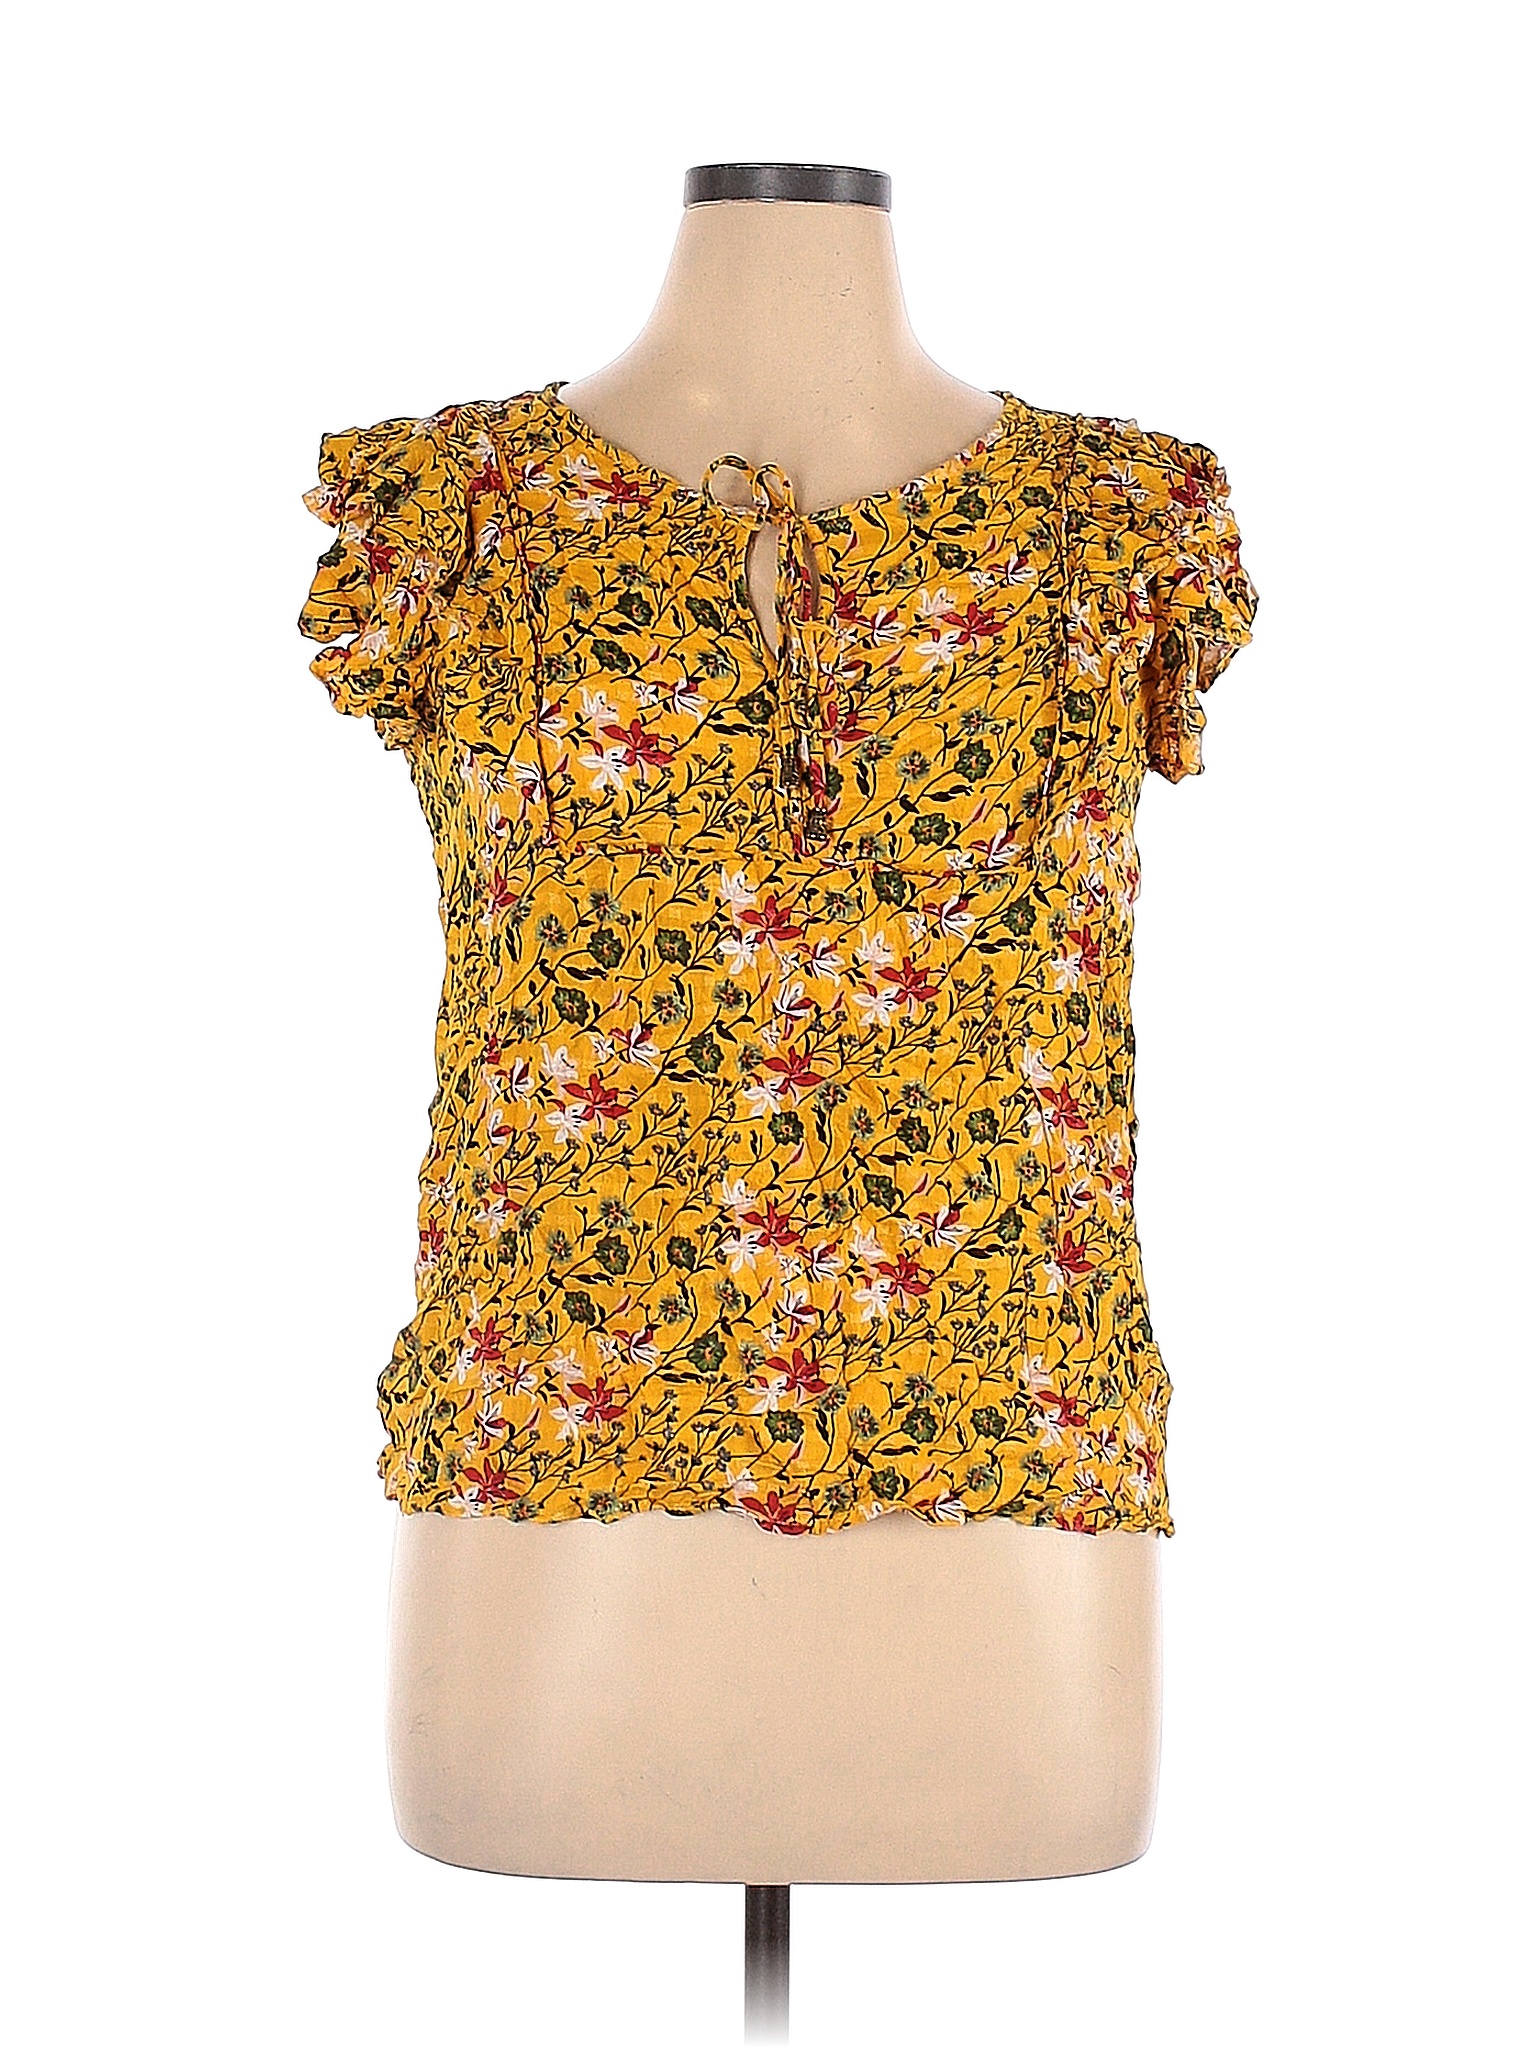 Jane and Delancey 100% Rayon Floral Yellow Short Sleeve Blouse Size XL ...